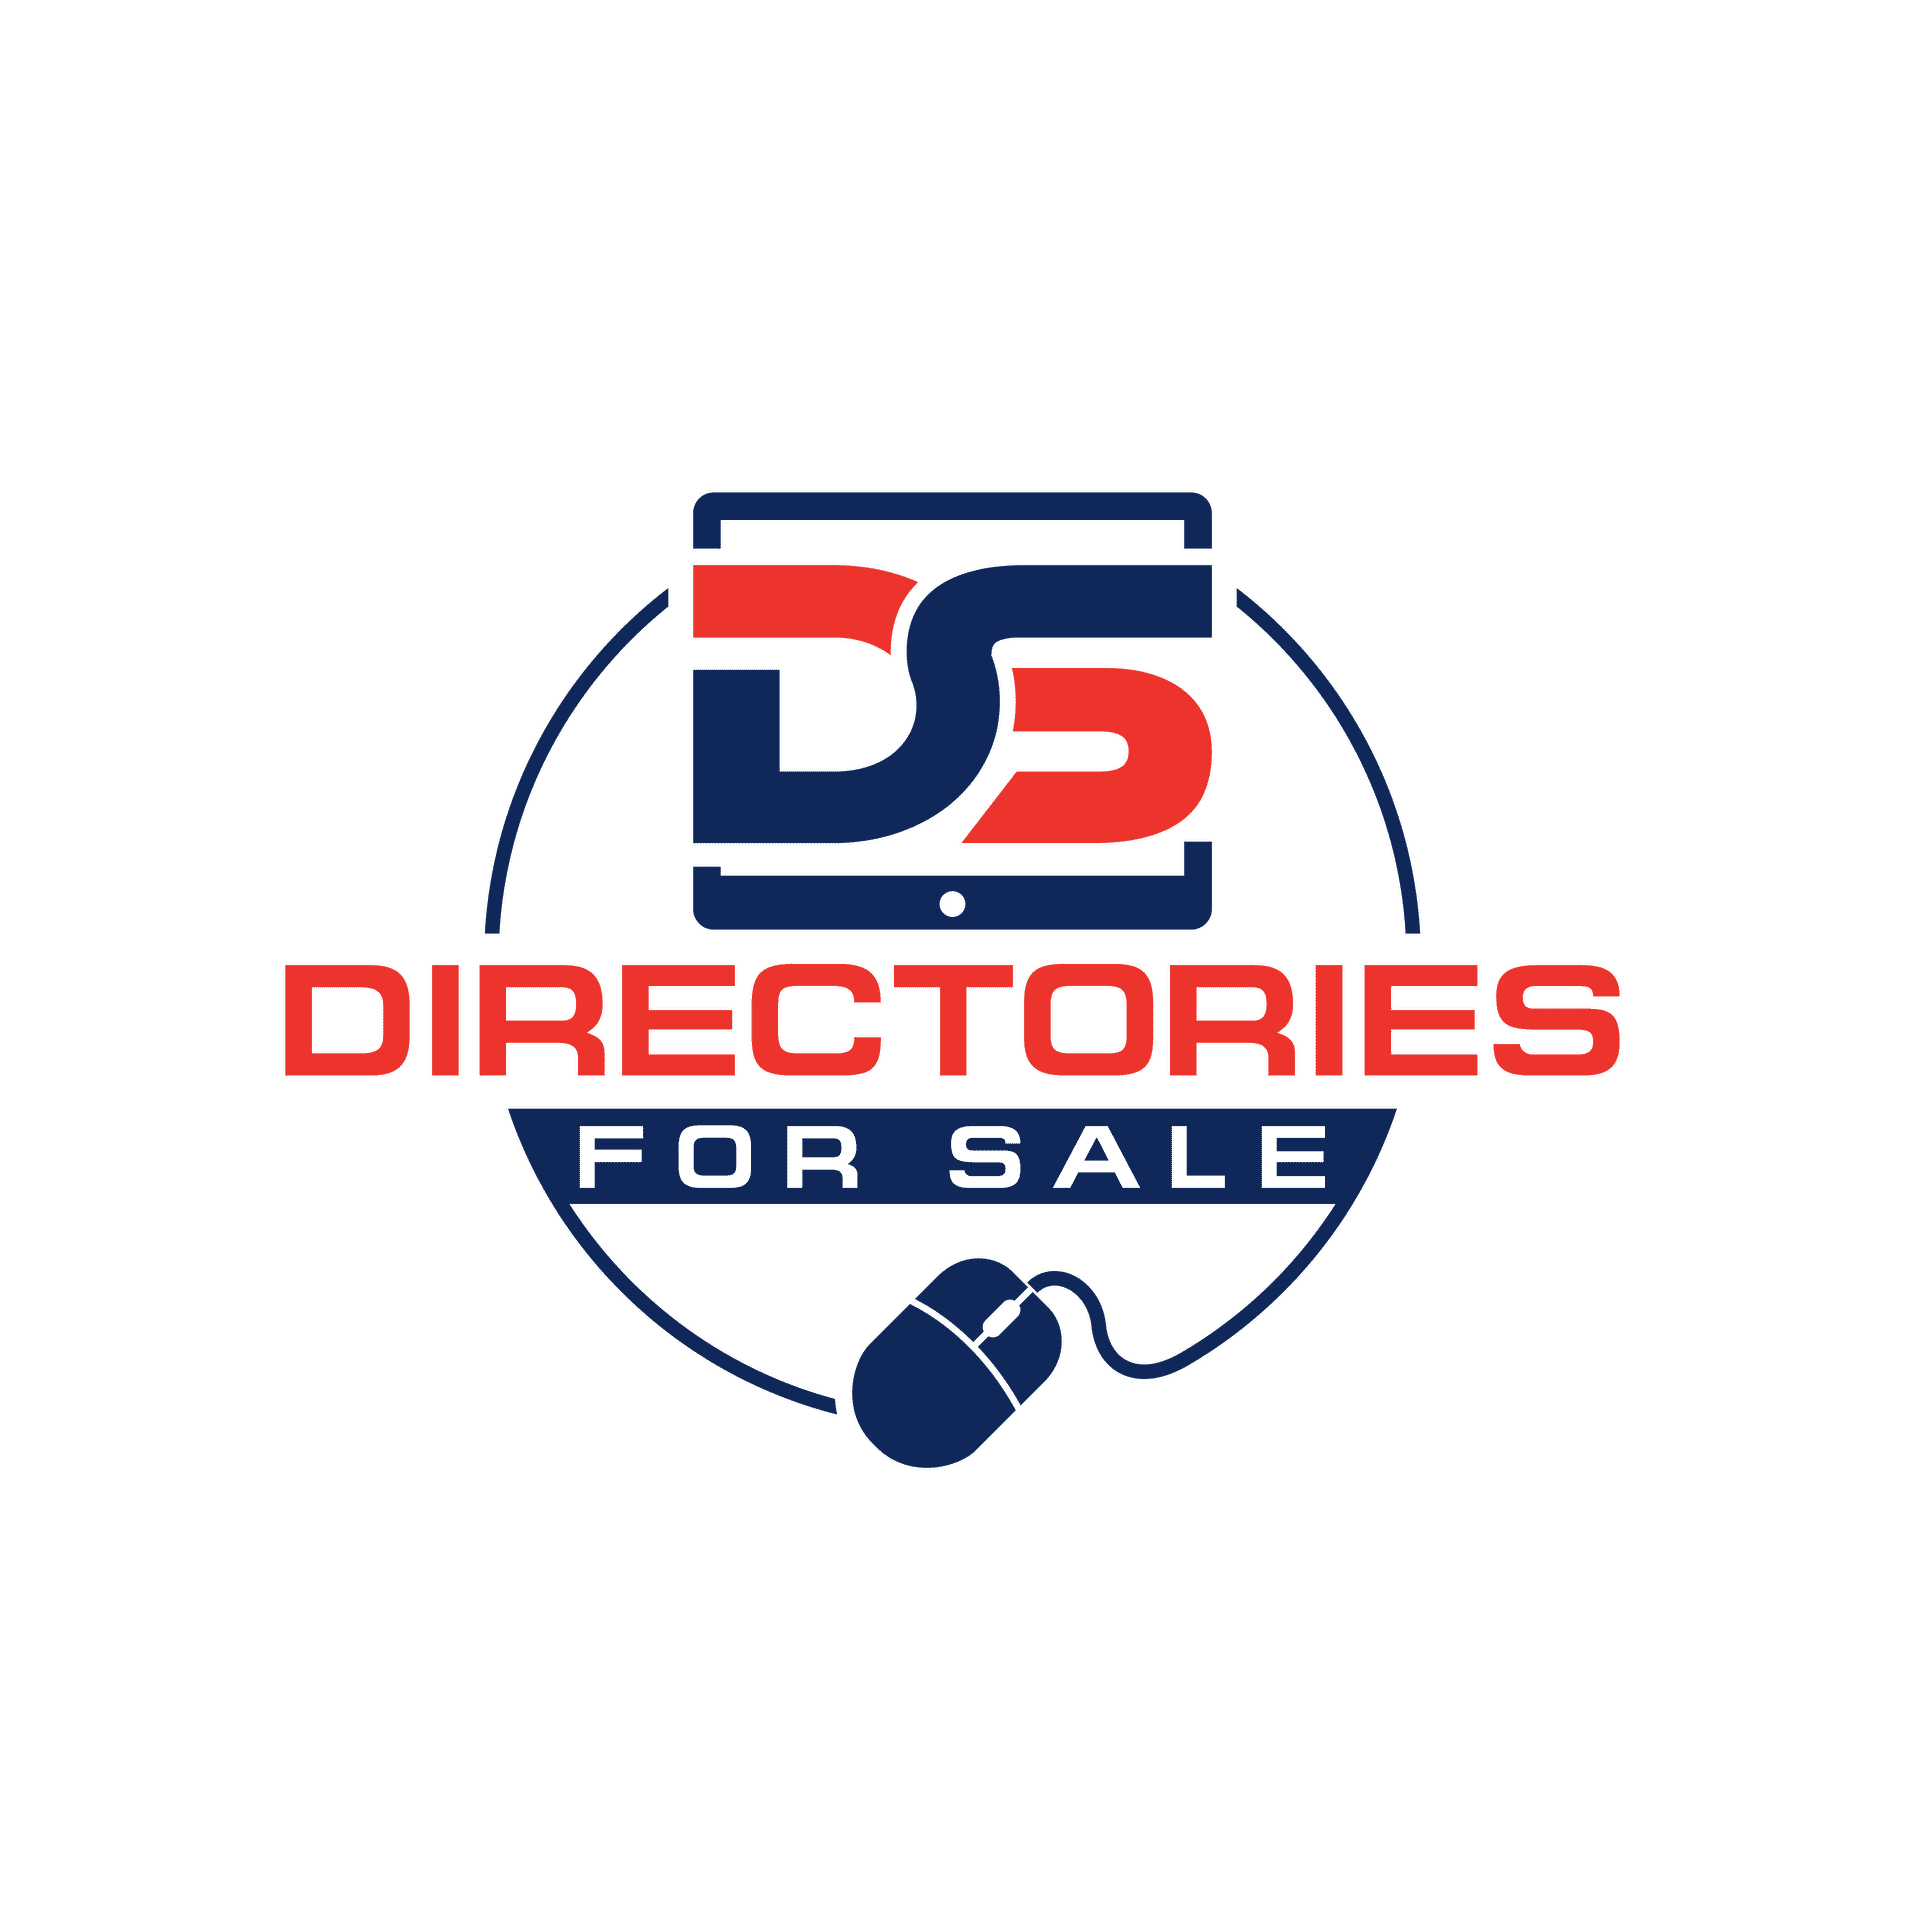 Business Directories For Sale